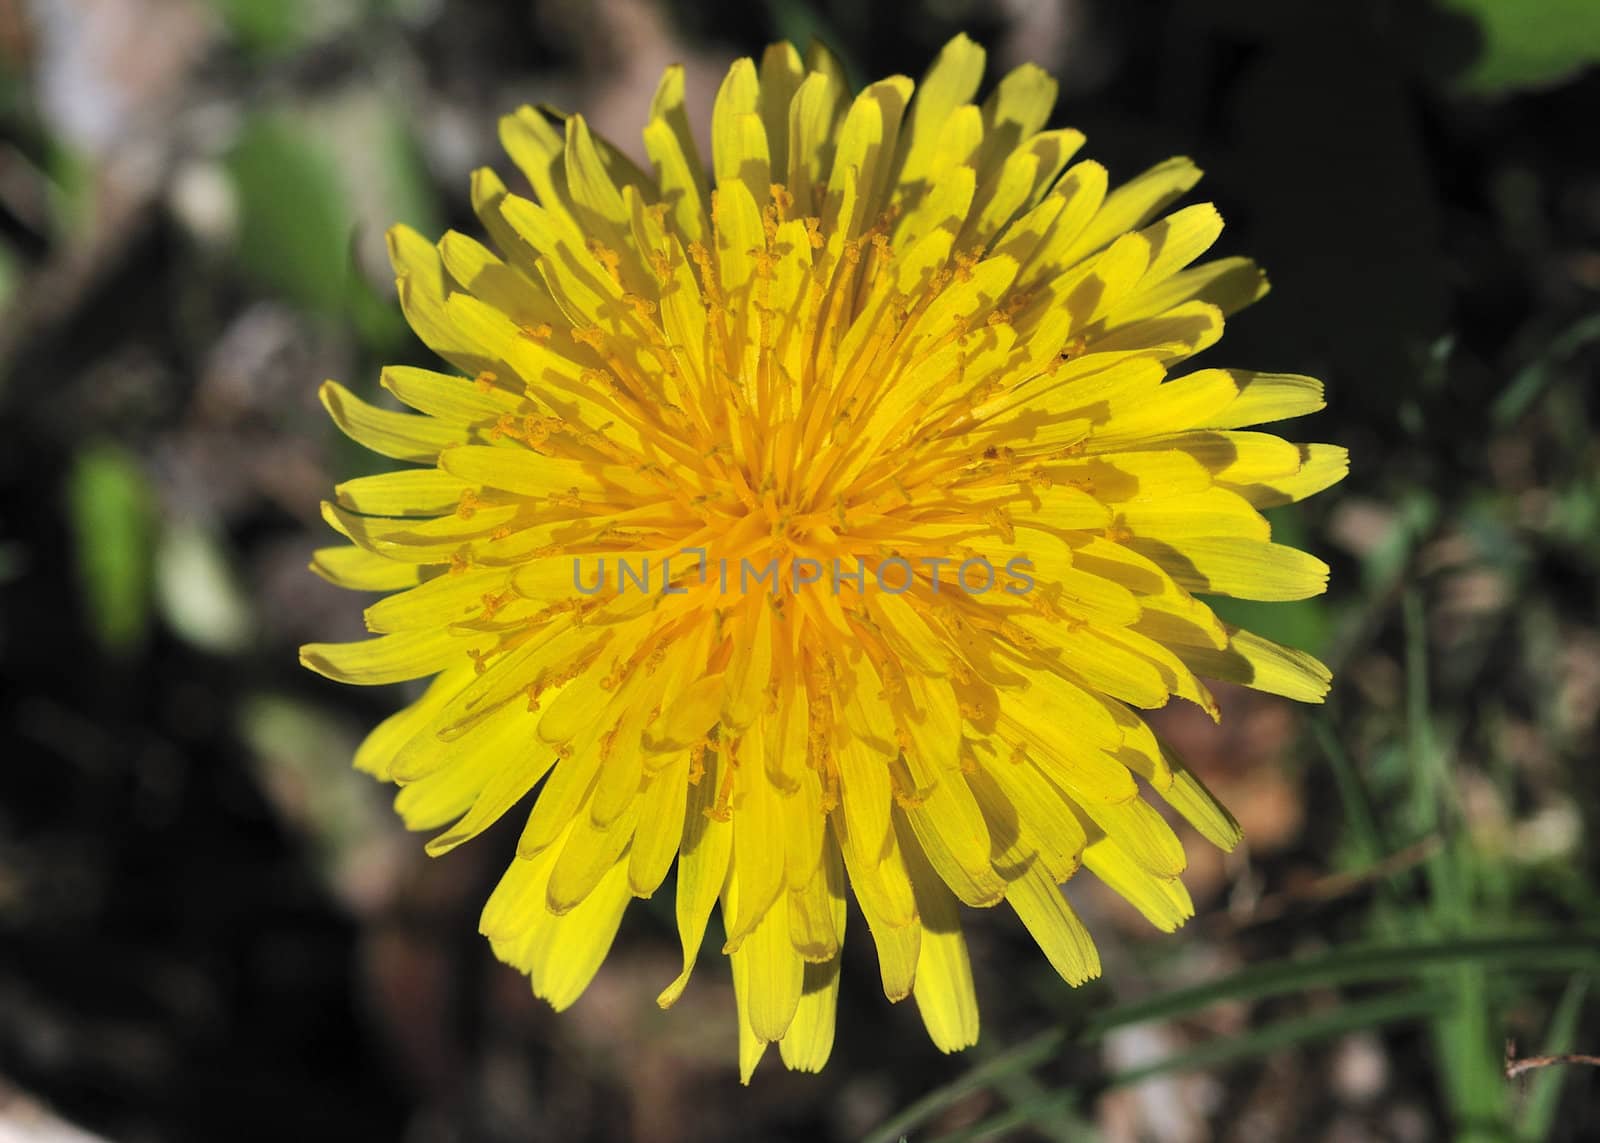 A close-up of a common dandelion in early May.